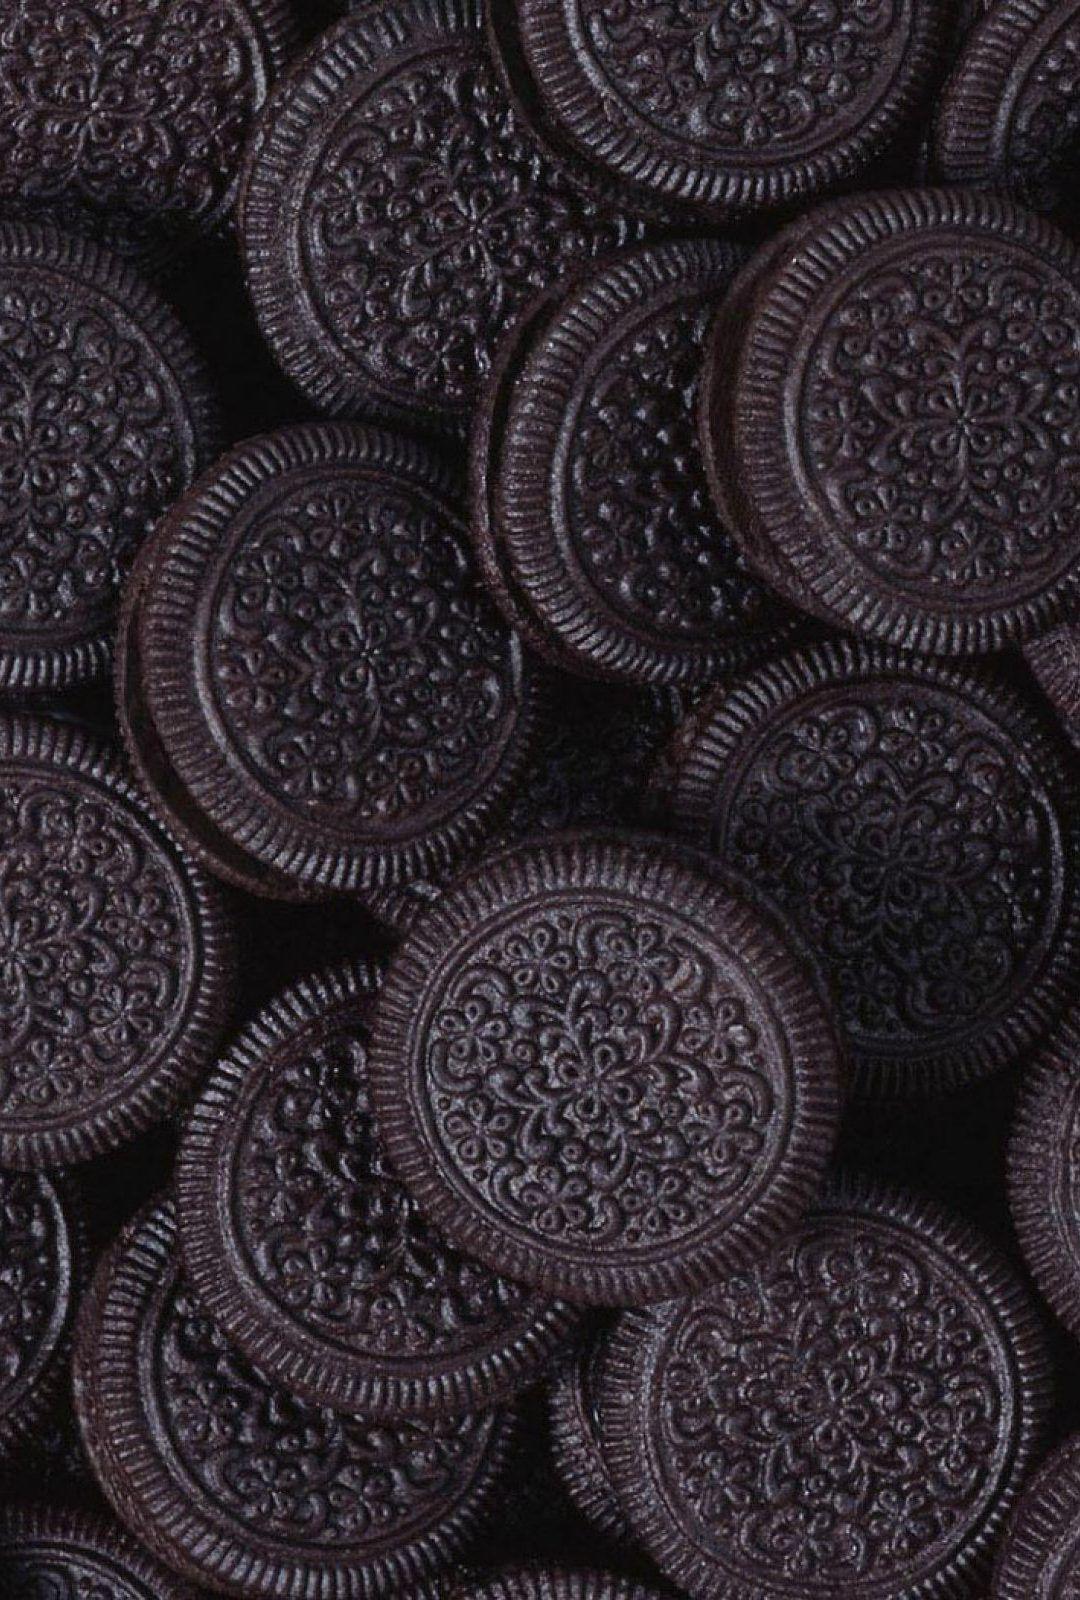 Cookies Wallpaper 4K, Supreme, Oreo, Red background